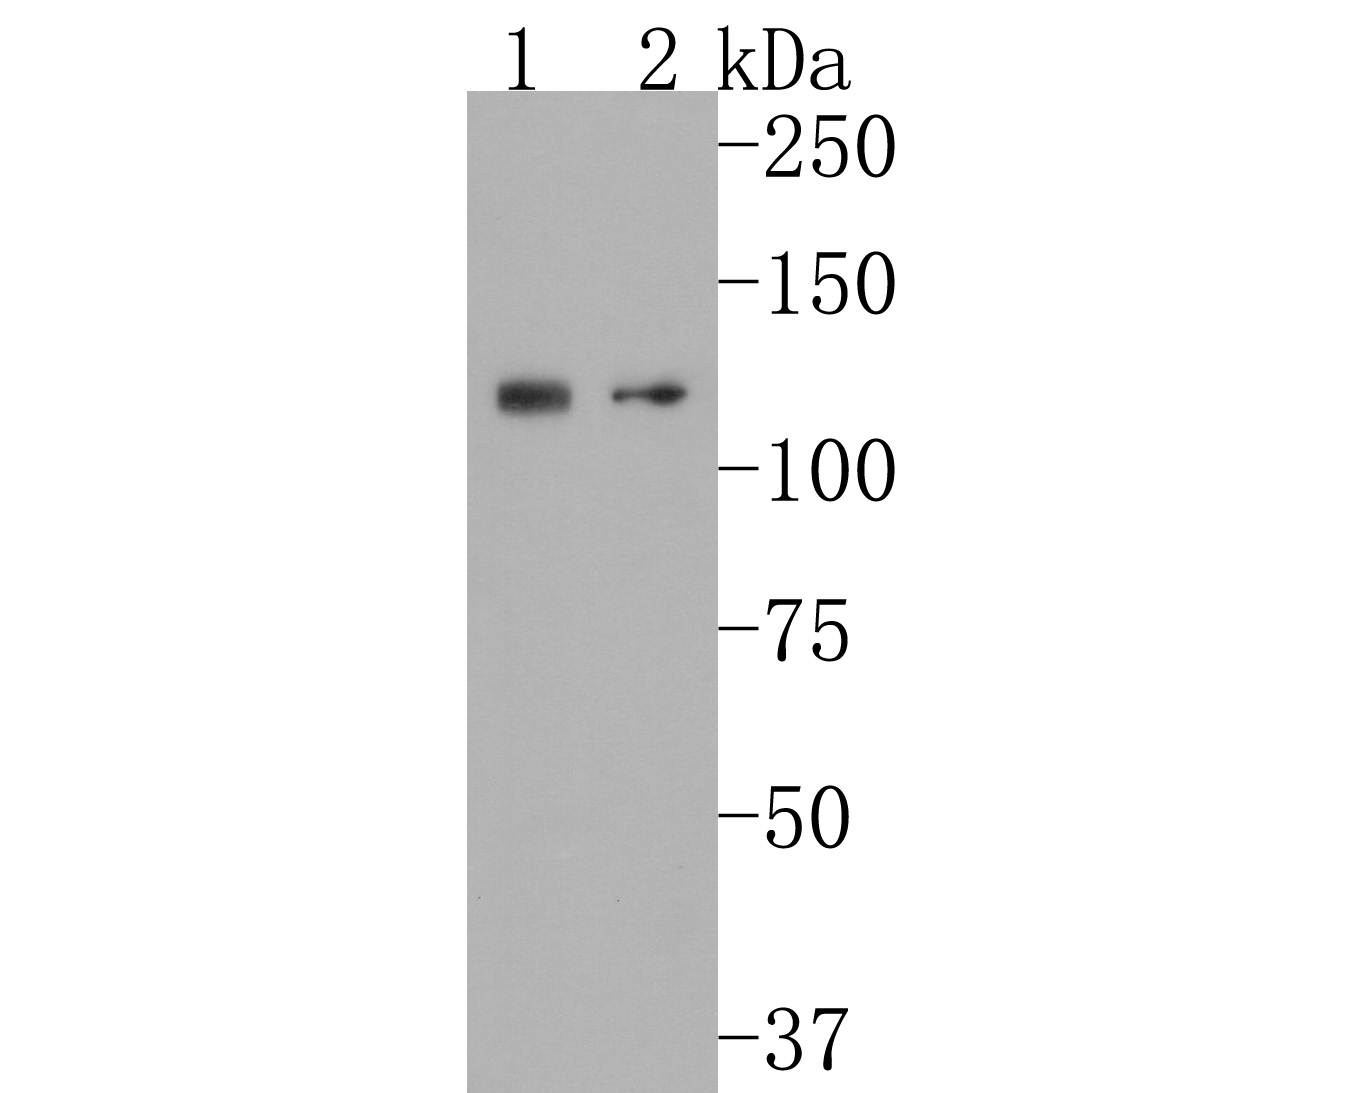 Western blot analysis of  on different lysates. Proteins were transferred to a PVDF membrane and blocked with 5% NFDM/TBST for 1 hour at room temperature. The primary antibody (HA600072, 1/500) was used in 5% NFDM/TBST at room temperature for 2 hours. Goat Anti-Mouse IgG - HRP Secondary Antibody (HA1006) at 1:20,000 dilution was used for 1 hour at room temperature.<br />
Positive control:<br />
Lane 1: A549 cell lysate<br />
Lane 2: A431 cell lysate<br />
<br />
Predicted band size: 76.5 kDa<br />
Observed band size: 120 kDa